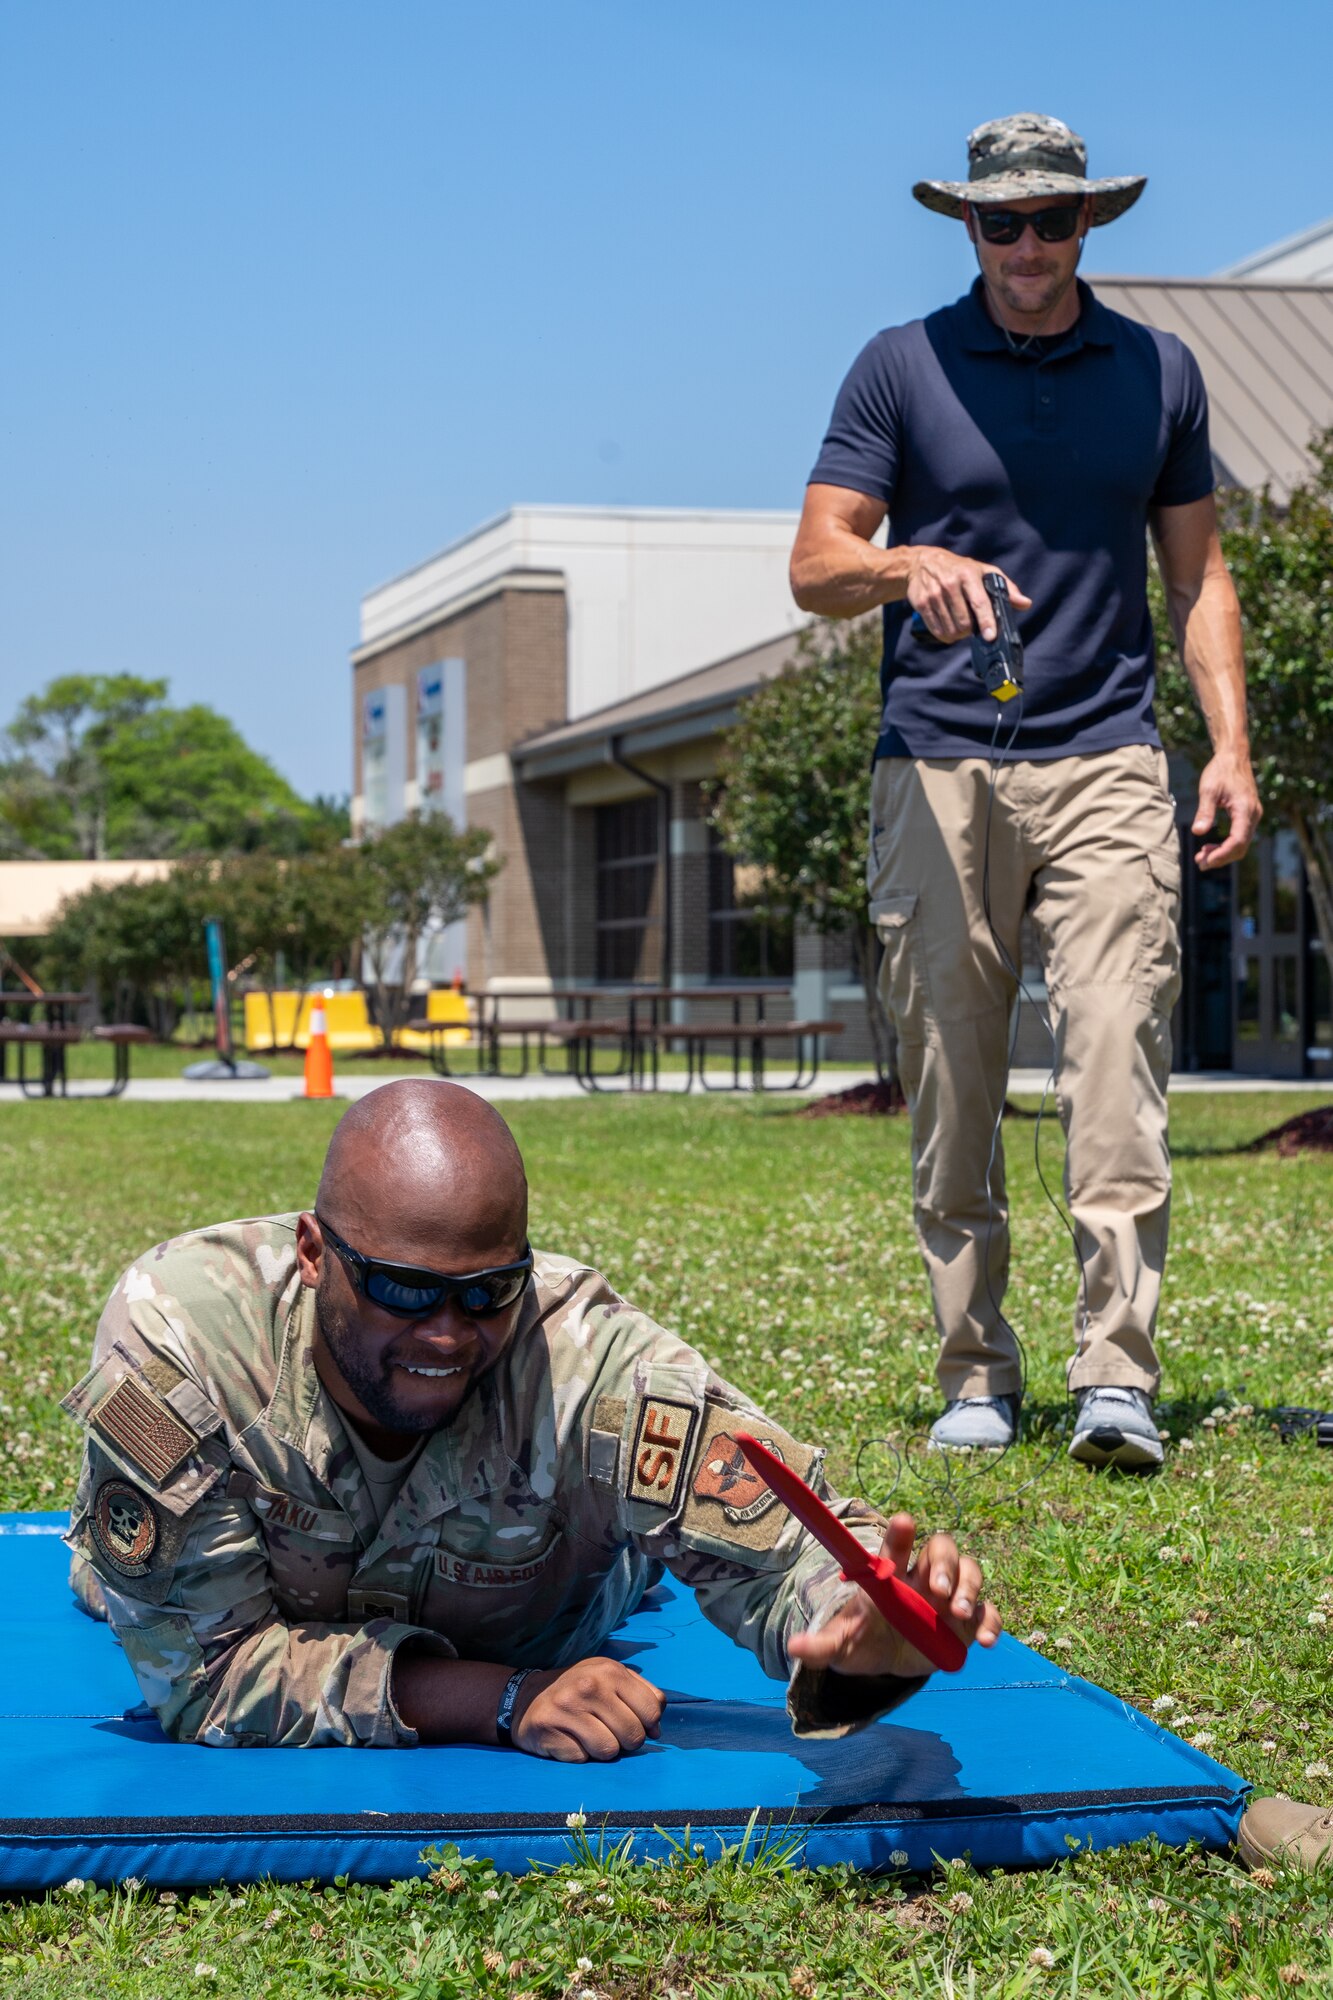 U.S. Air Force Tech. Sgt. Michael Taku, 81st Security Forces Squadron bravo flight sergeant, drops a training knife while being tased by Justin Depew, 81st SFS training instructor, during a demonstration for National Police Week at Keesler Air Force Base, Mississippi, May 16, 2023.